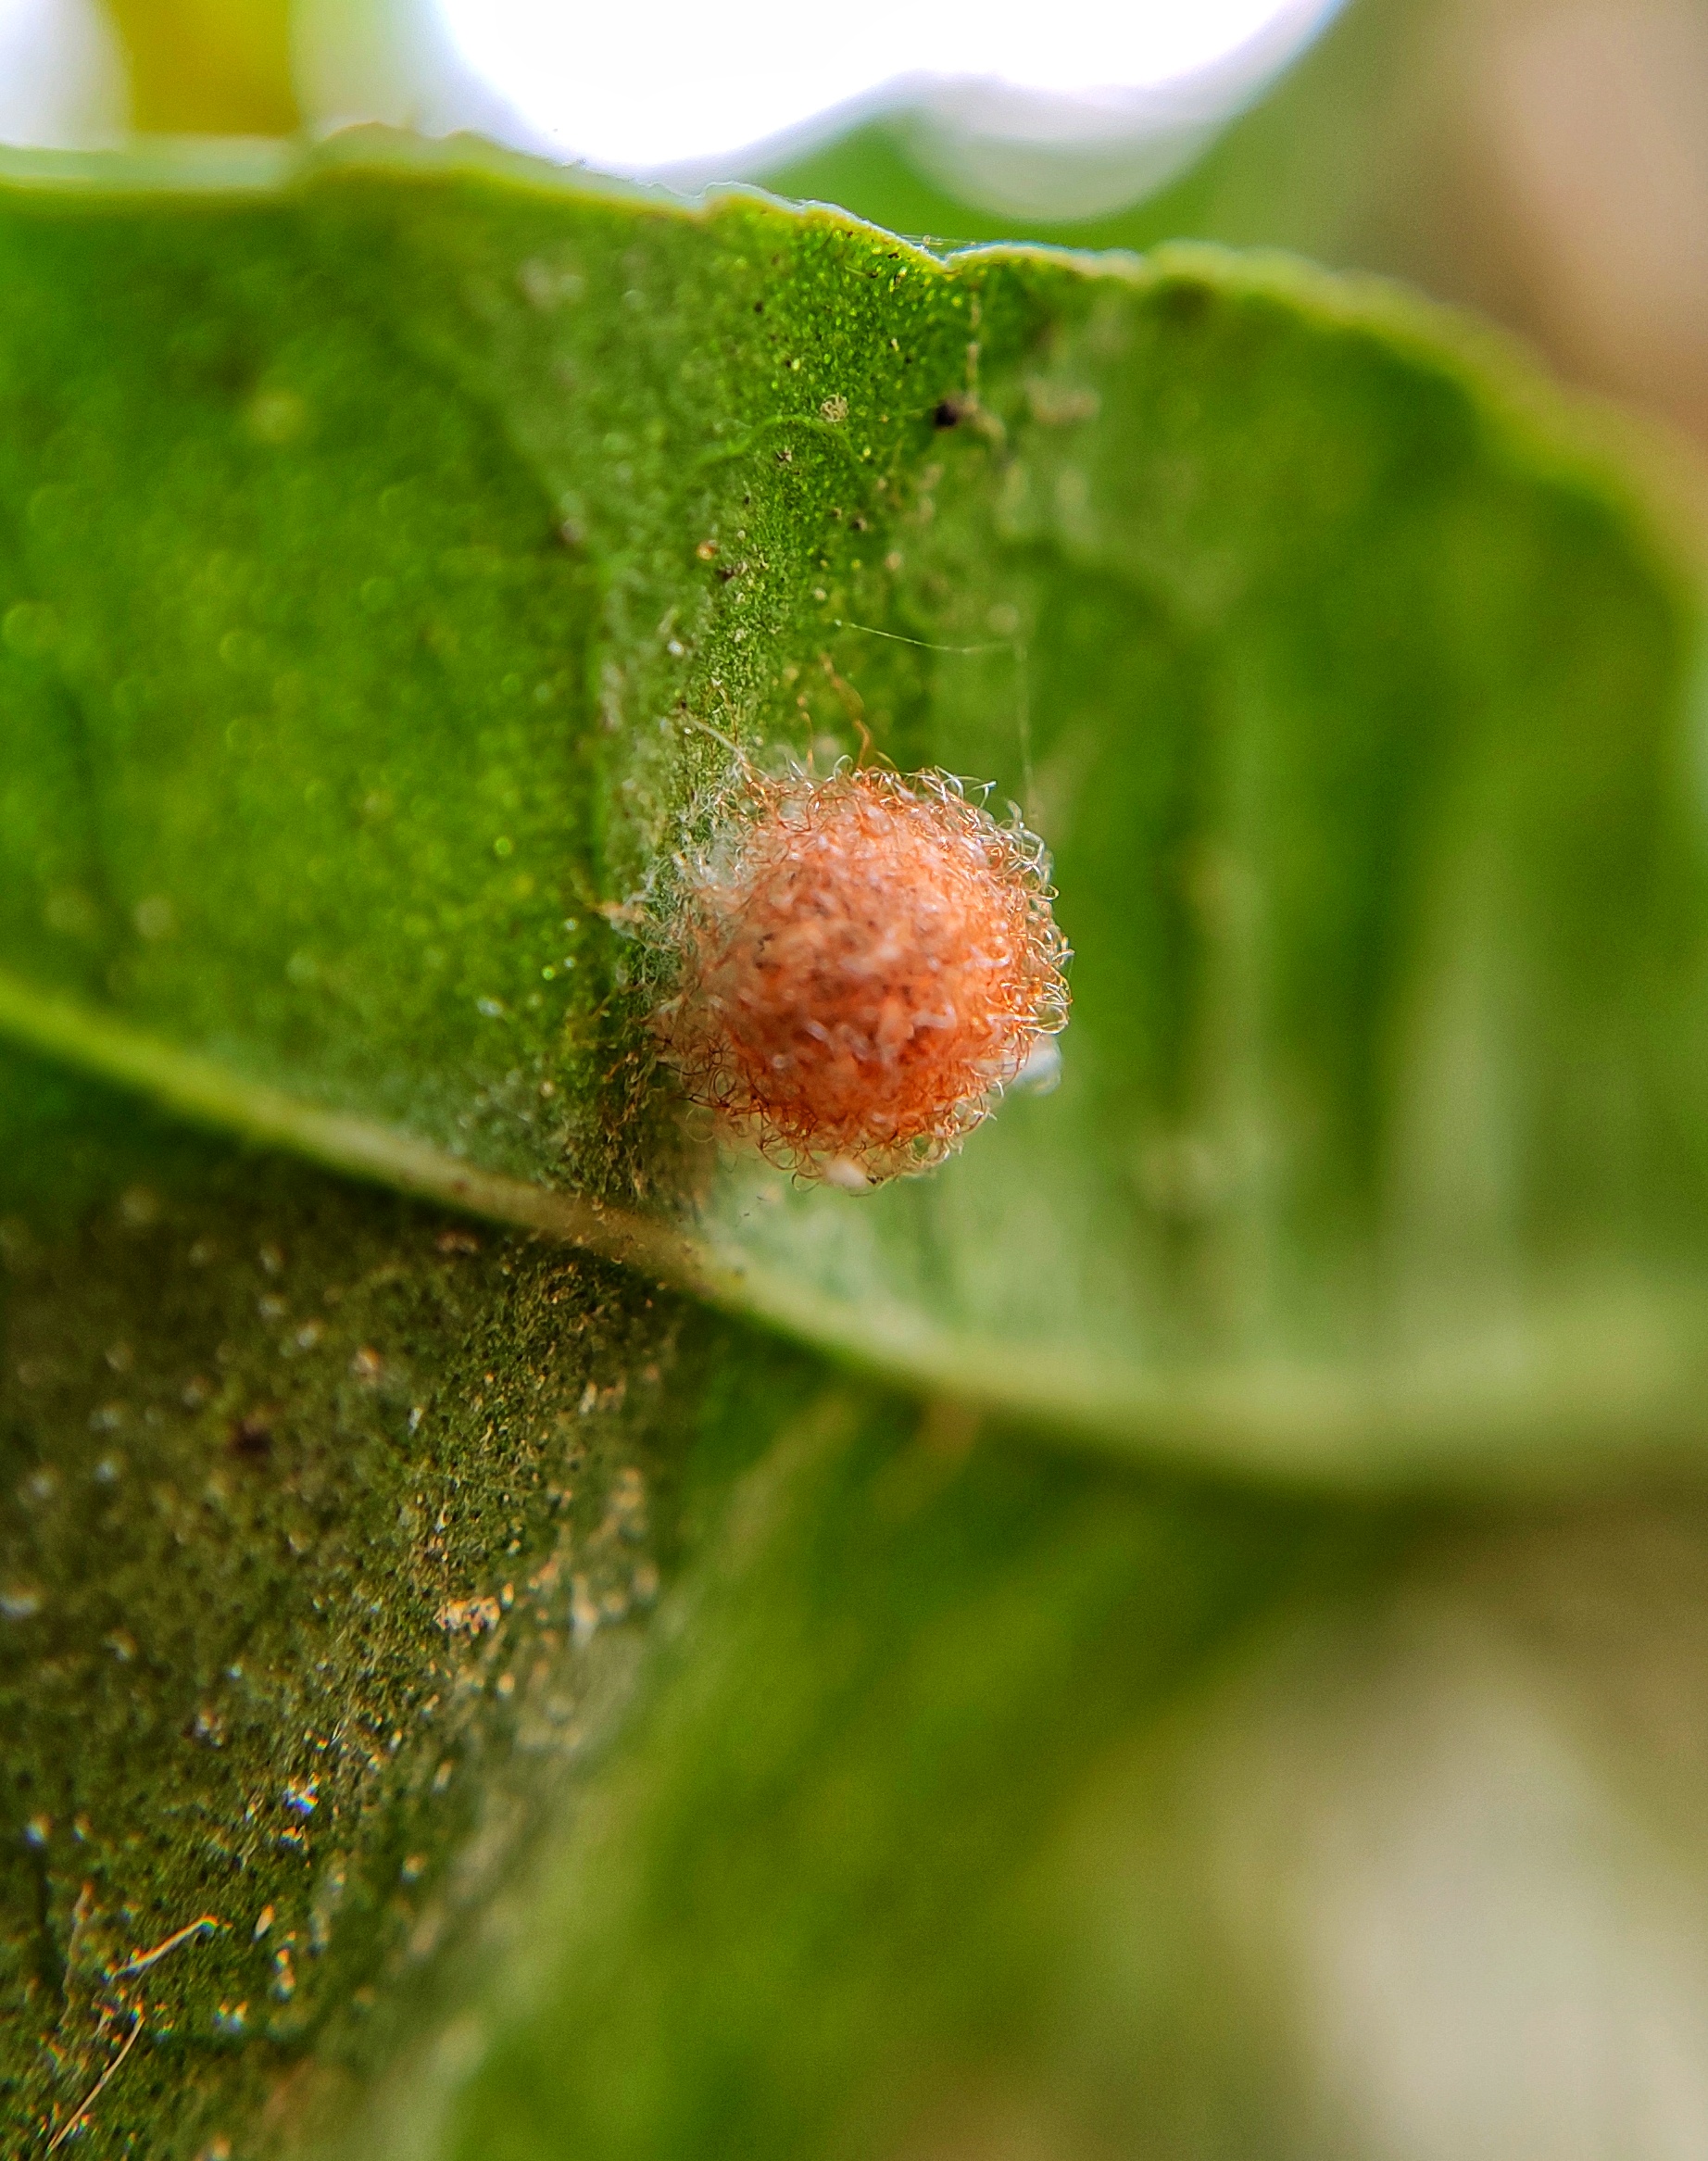 Egg of insect on plant leaf